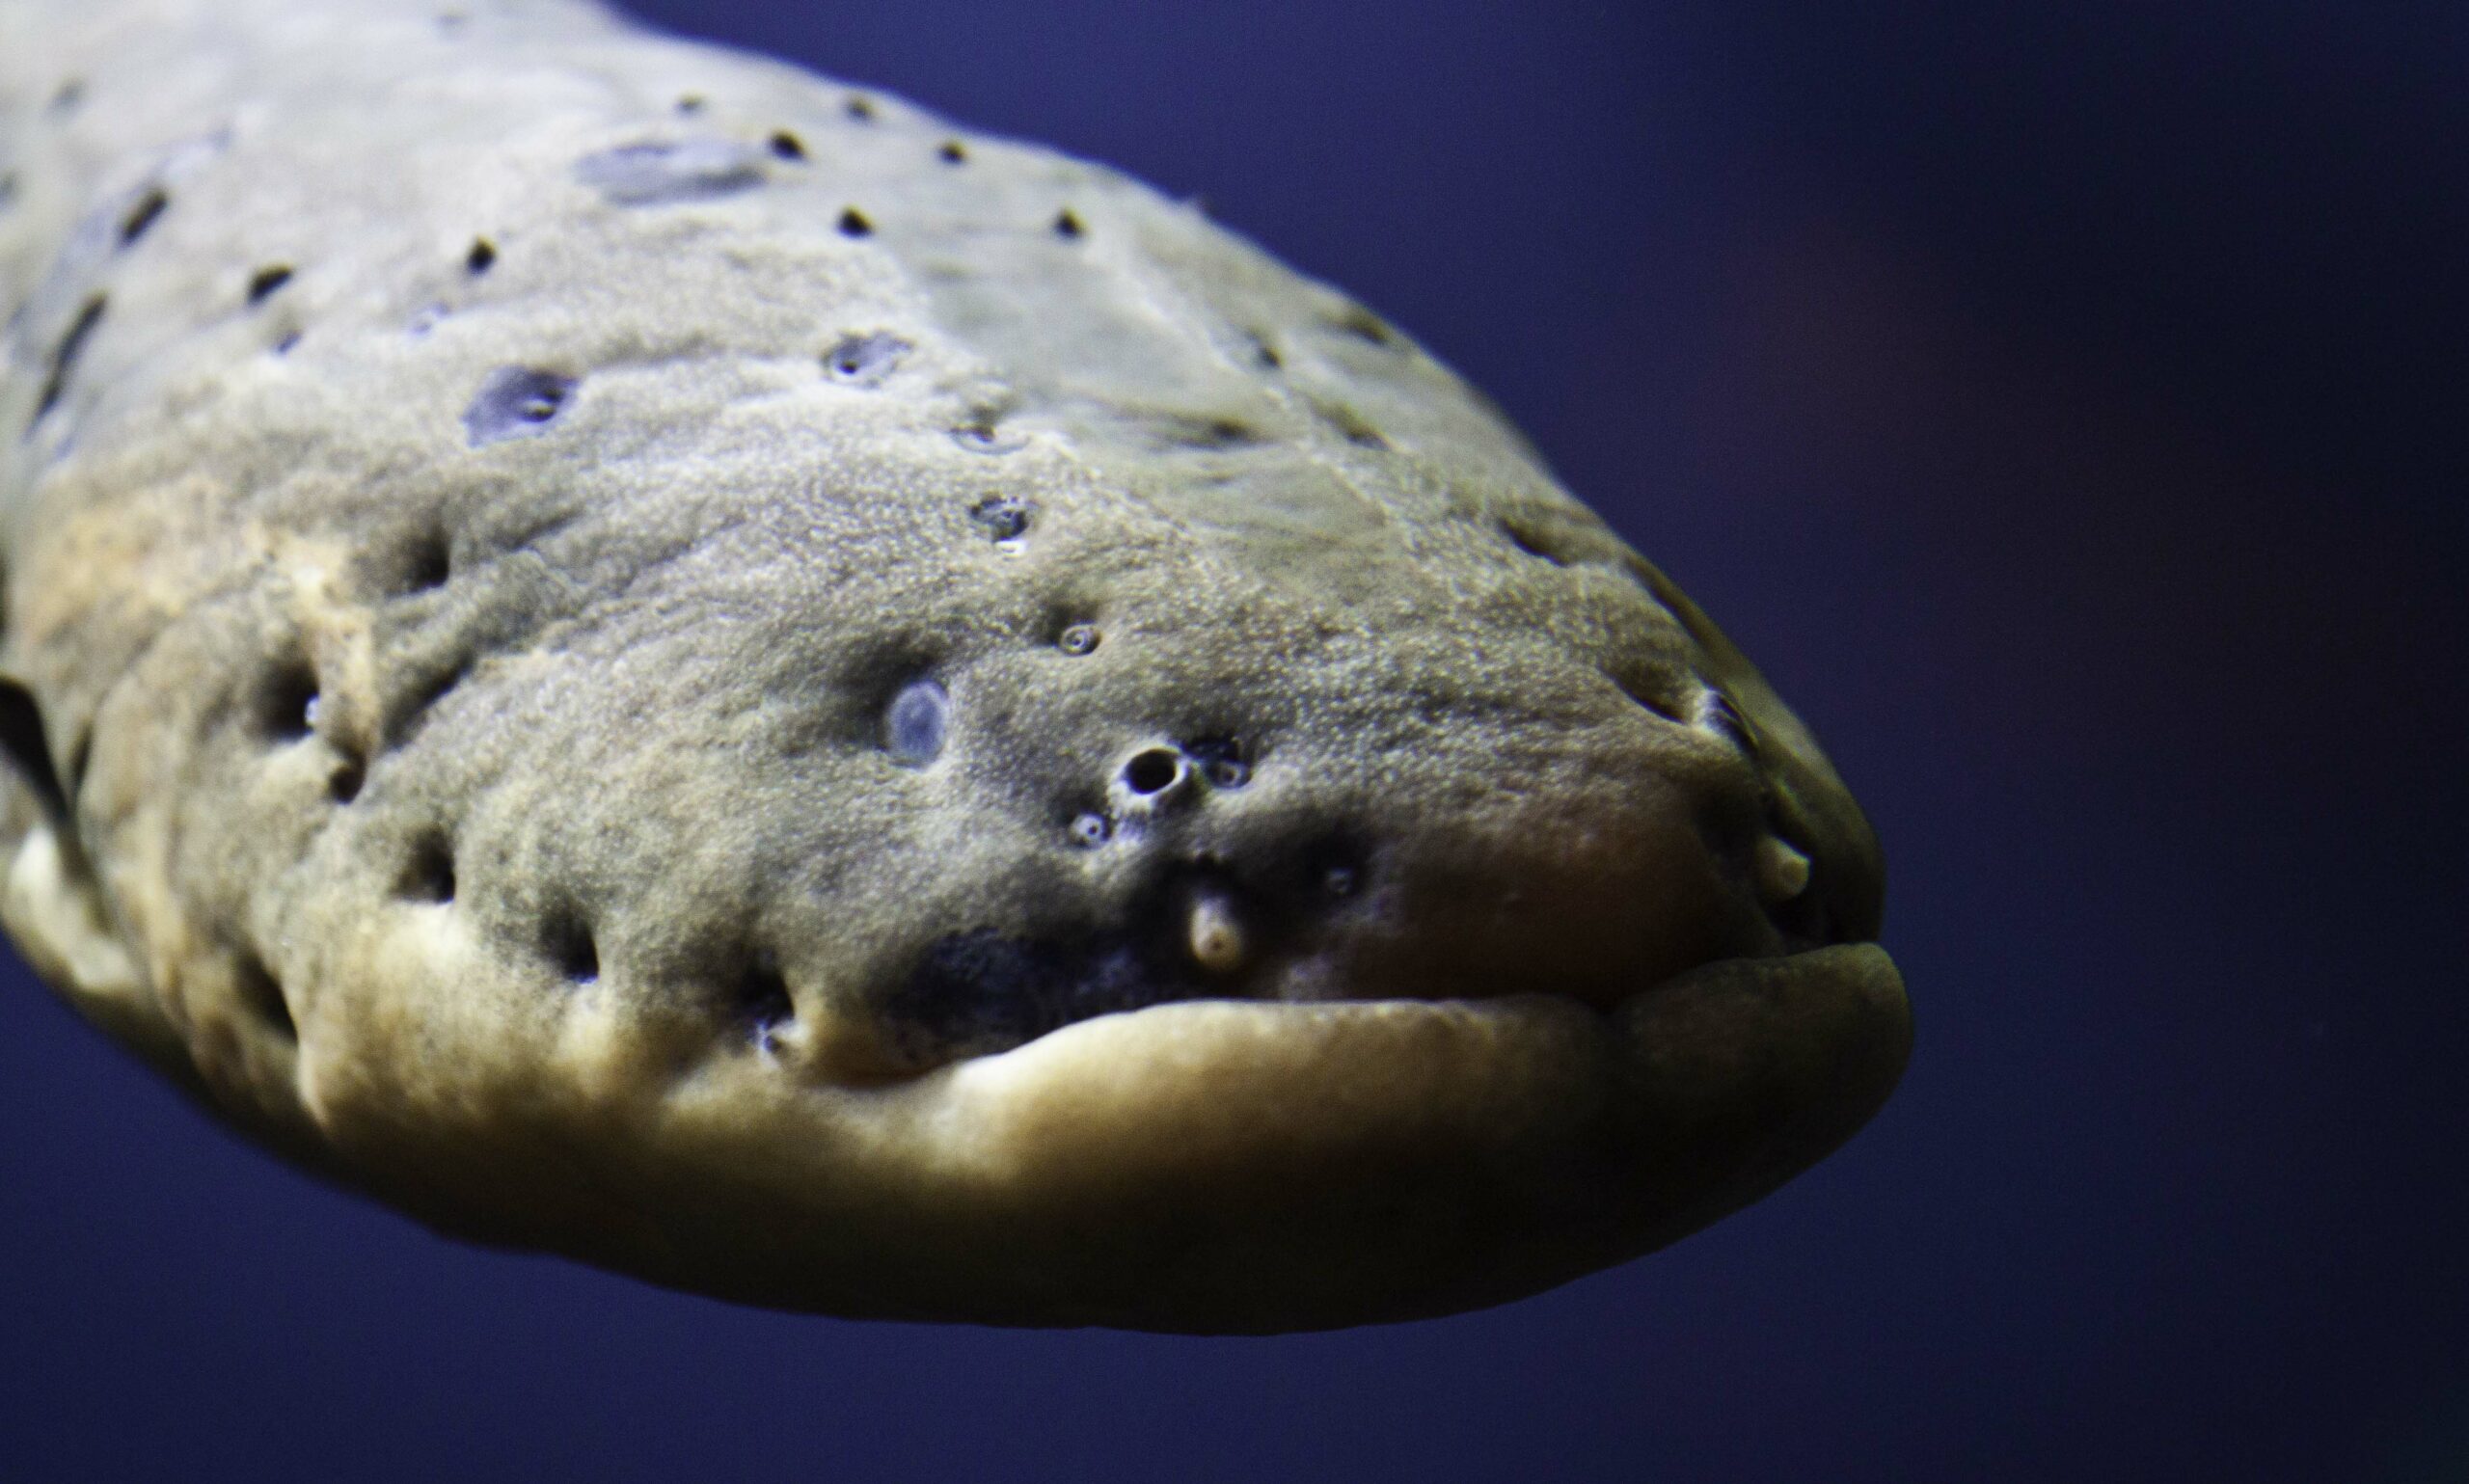 Electric Eels Hunt By Tracking Electrical Currents In Their Prey